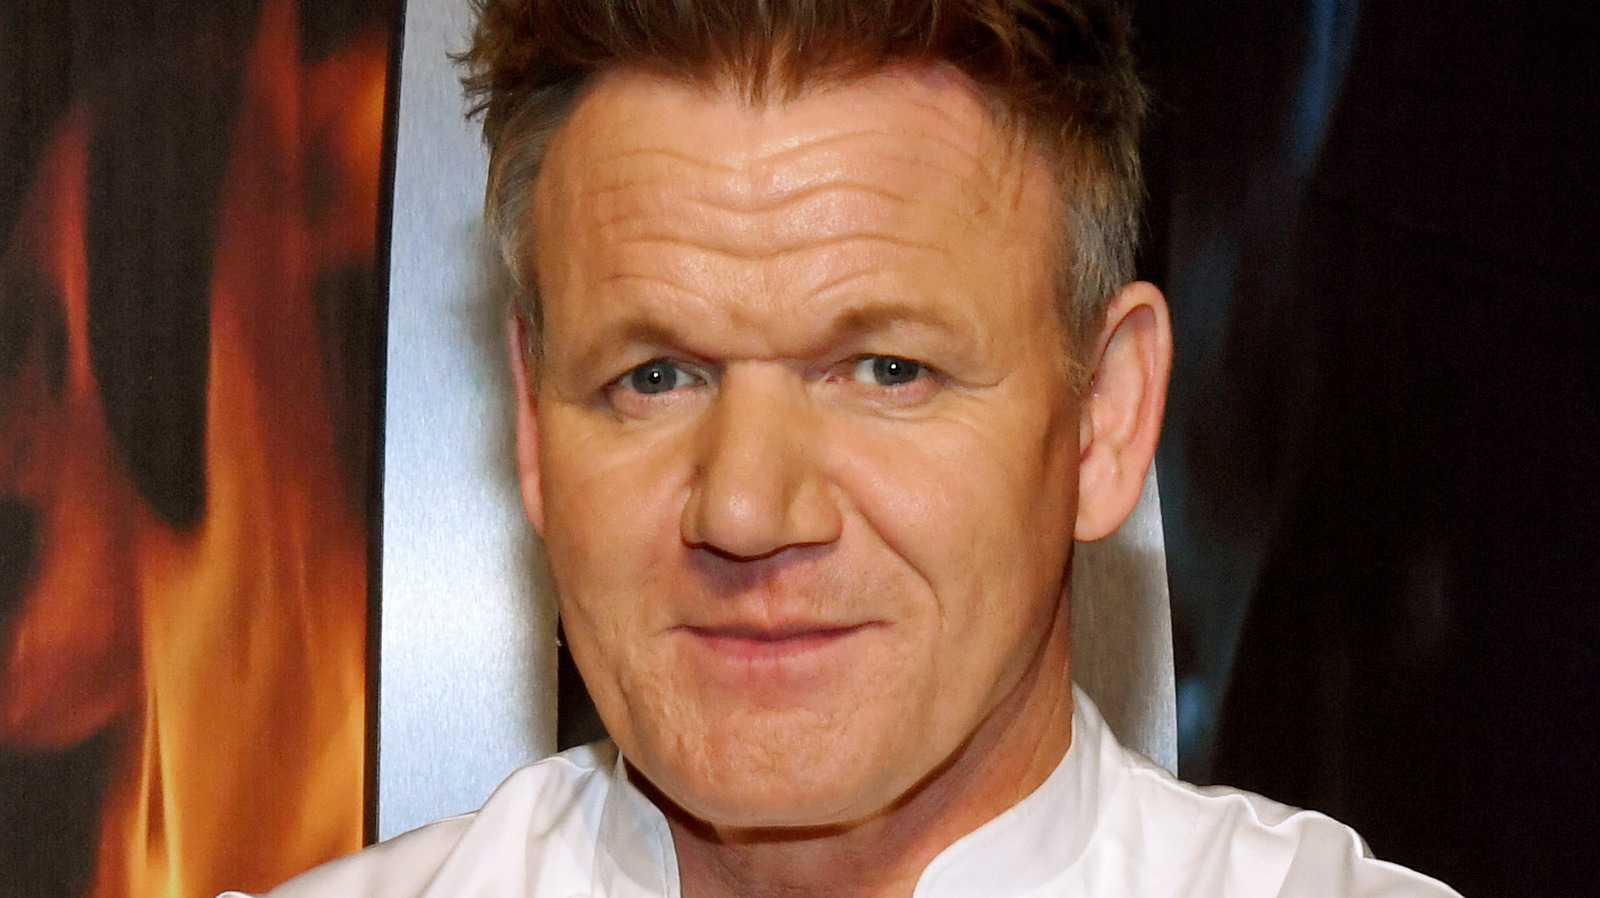 https://www.nickiswift.com/img/gallery/the-transformation-of-gordon-ramsay-from-teenager-to-54-years-old/l-intro-1622051825.jpg